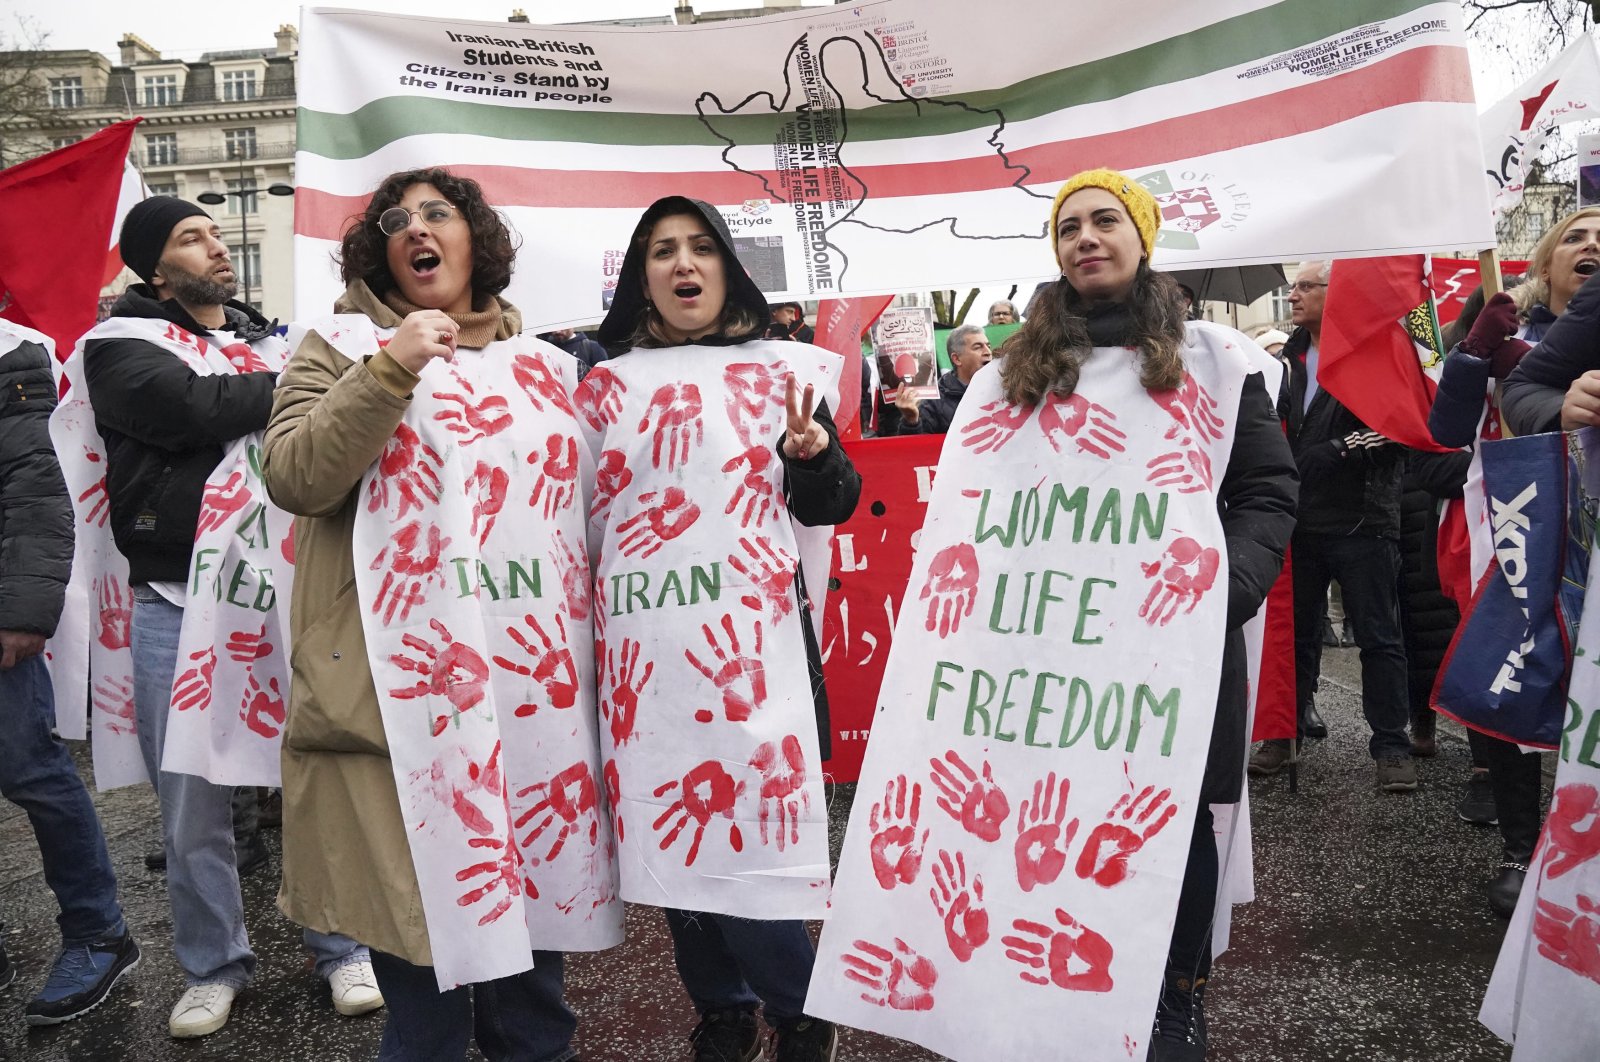 Protesters demonstrate the Iranian government following the death of Mahsa Amini, London, U.K., Jan. 8, 2023. (AP Photo)